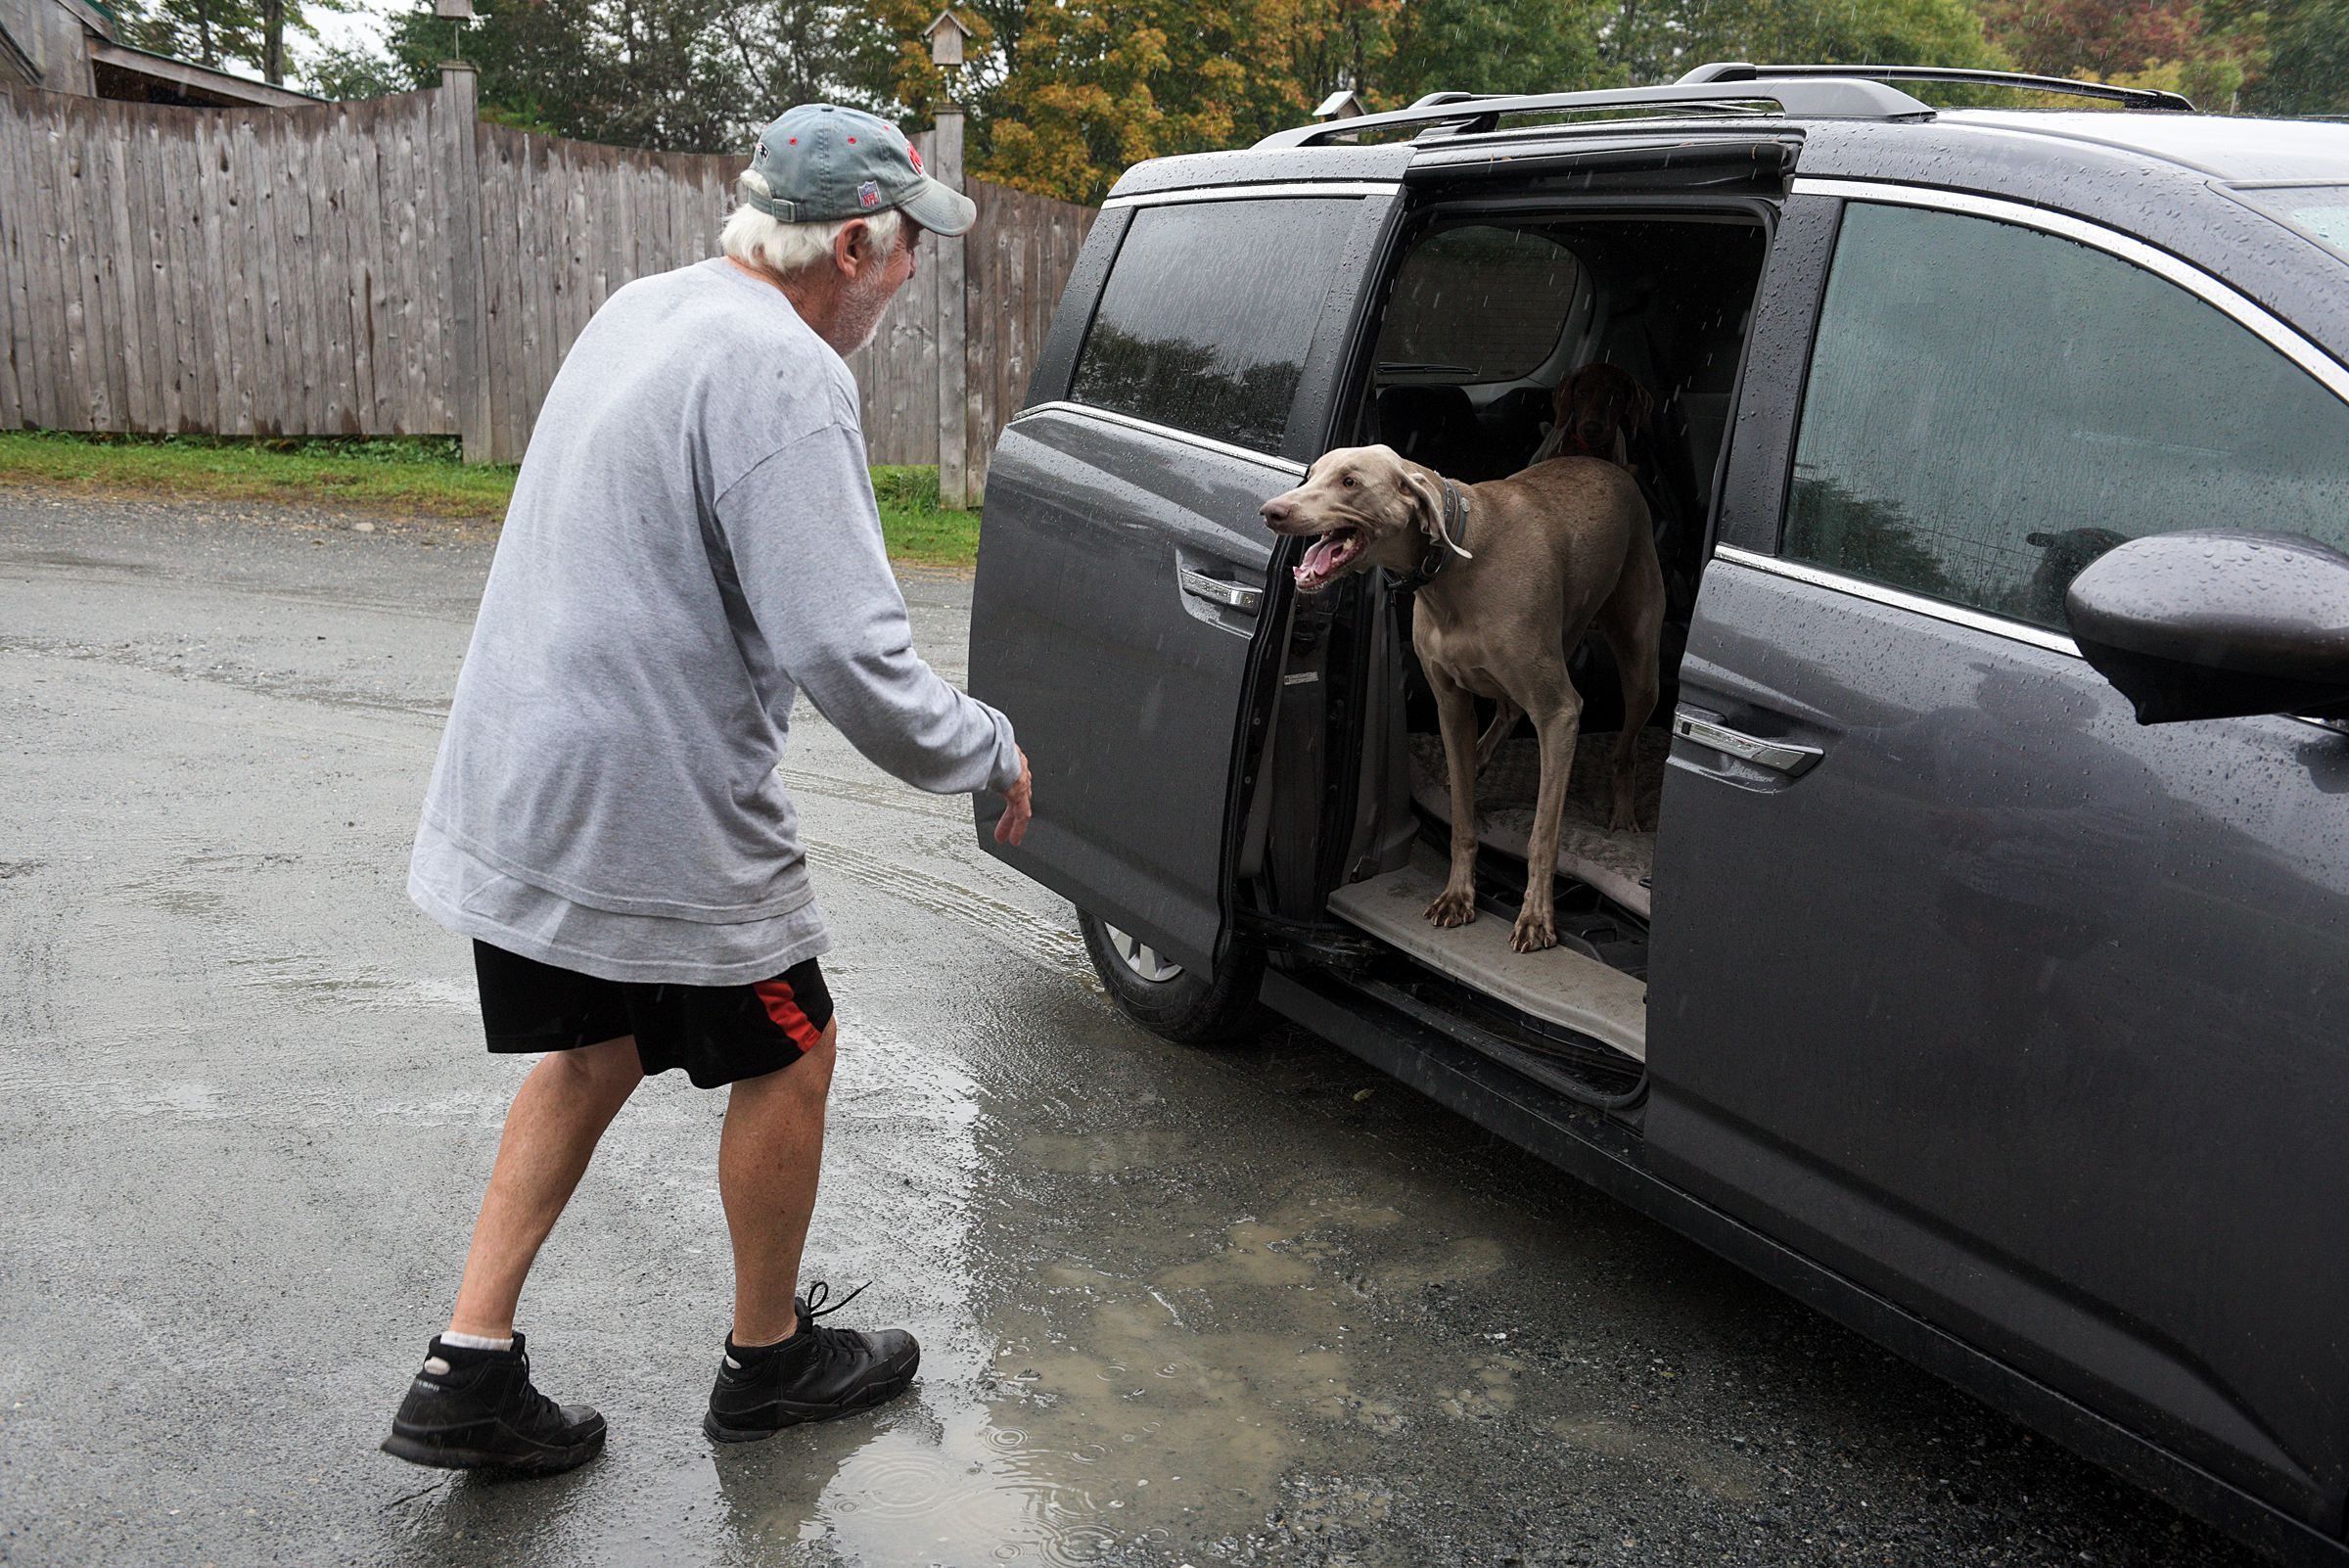 Charlie Bacon, of Enfield, greets his Weimaraners Sammie, at the door of his van, and Winnie, inside, after picking them up at Mountain View Pet Resor in Canaan, N.H., Thursday, Sept. 26, 2019. "This is the most comfortable place for my wife and I to bring our dogs," said Bacon. "They're our kids. When we bring them here, we know they're safe." (Valley News - James M. Patterson) Copyright Valley News. May not be reprinted or used online without permission. Send requests to permission@vnews.com.